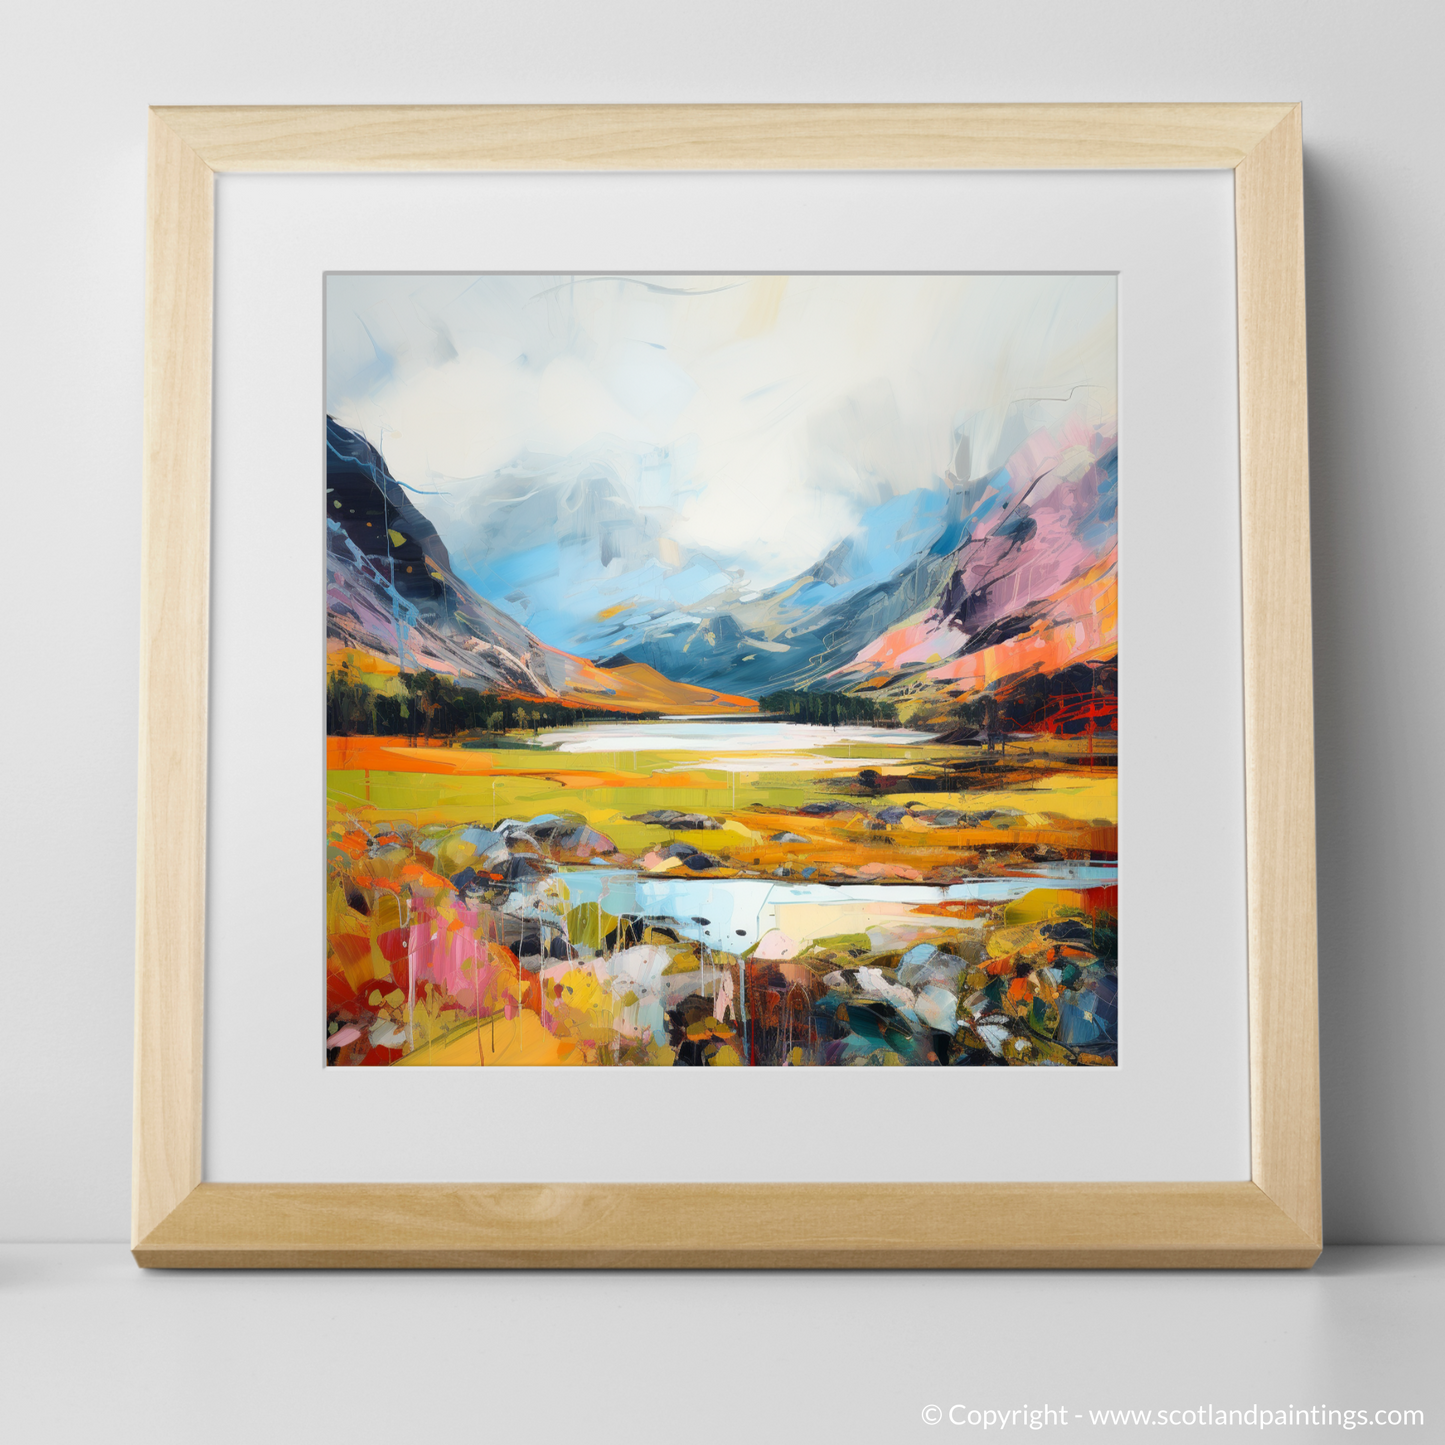 Painting and Art Print of Glen Coe, Highlands in summer. Summer Symphony of Glen Coe Highlands.